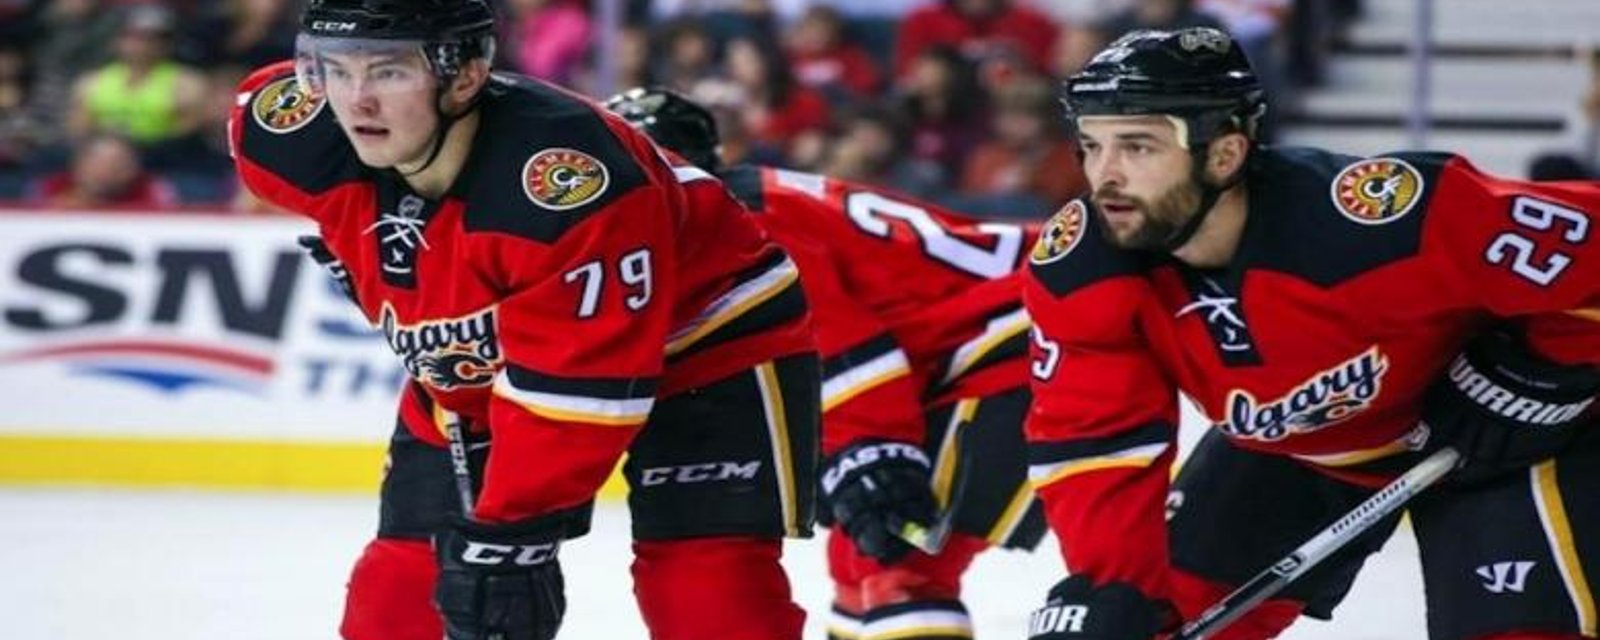 Young player will have great opportunity on Flames' top line.